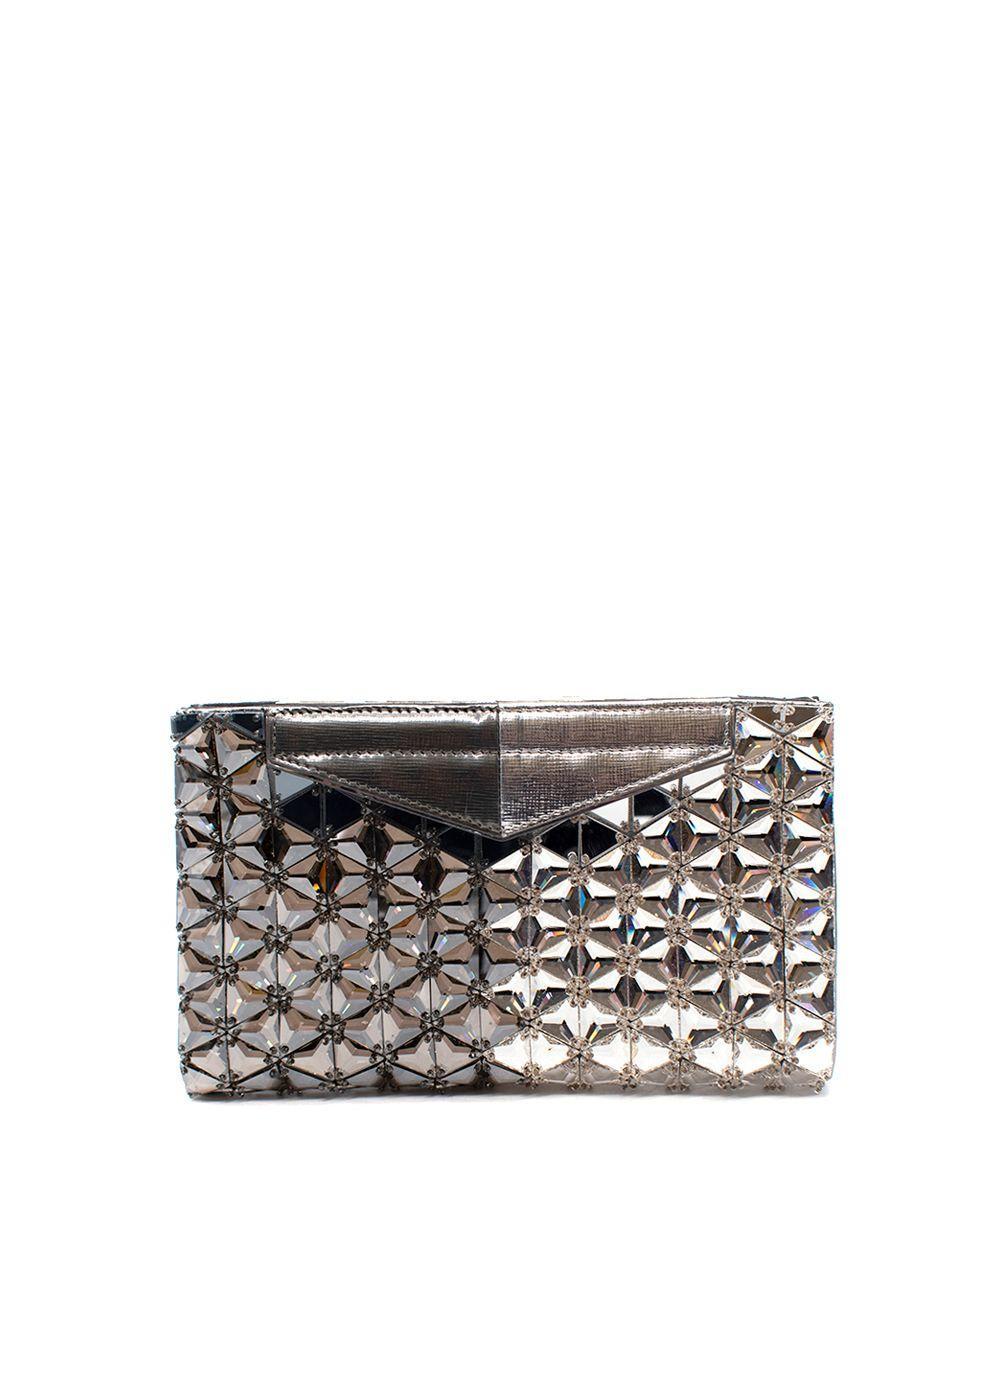 Fendi Mirrored Metallic Leather Clutch Bag

- Mirrored bicolour mosaic with small beads scattered in between
- Bicolour silver and gunmetal leather frame
- Magnetic closure
- Two open pockets
- Suede lined

Materials:
Leather

Made in Italy

9.5